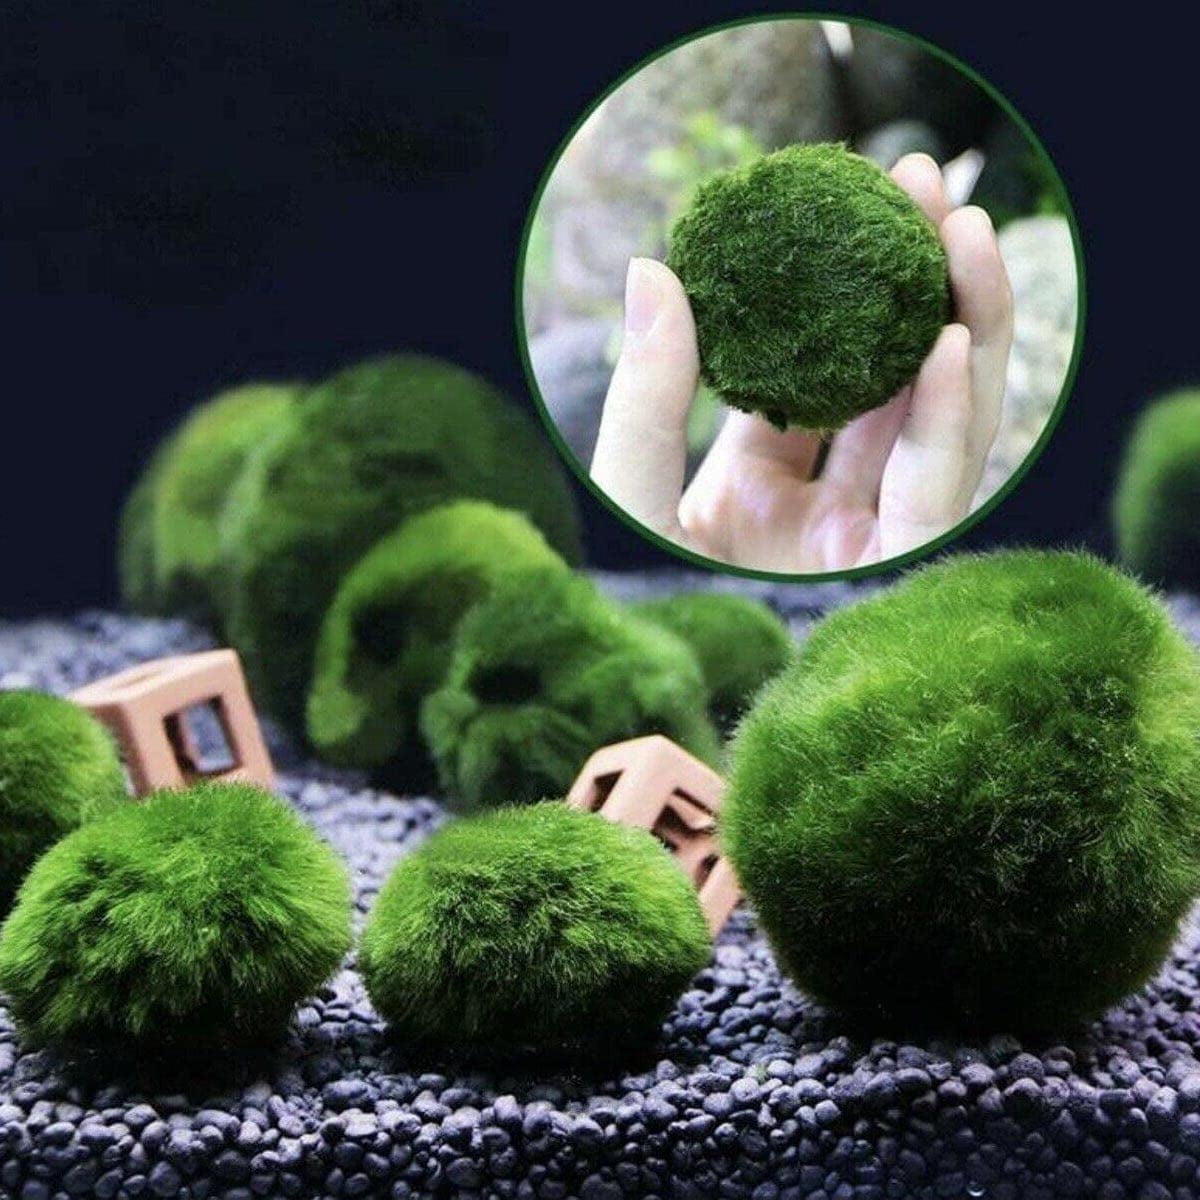 Qingbei Rina Moss Balls Decorative Bowl Fillers for Centerpiece,4 inch Set of 6,Large Moss Balls Green Decorative Balls,Preserved Marimo Moss Ball